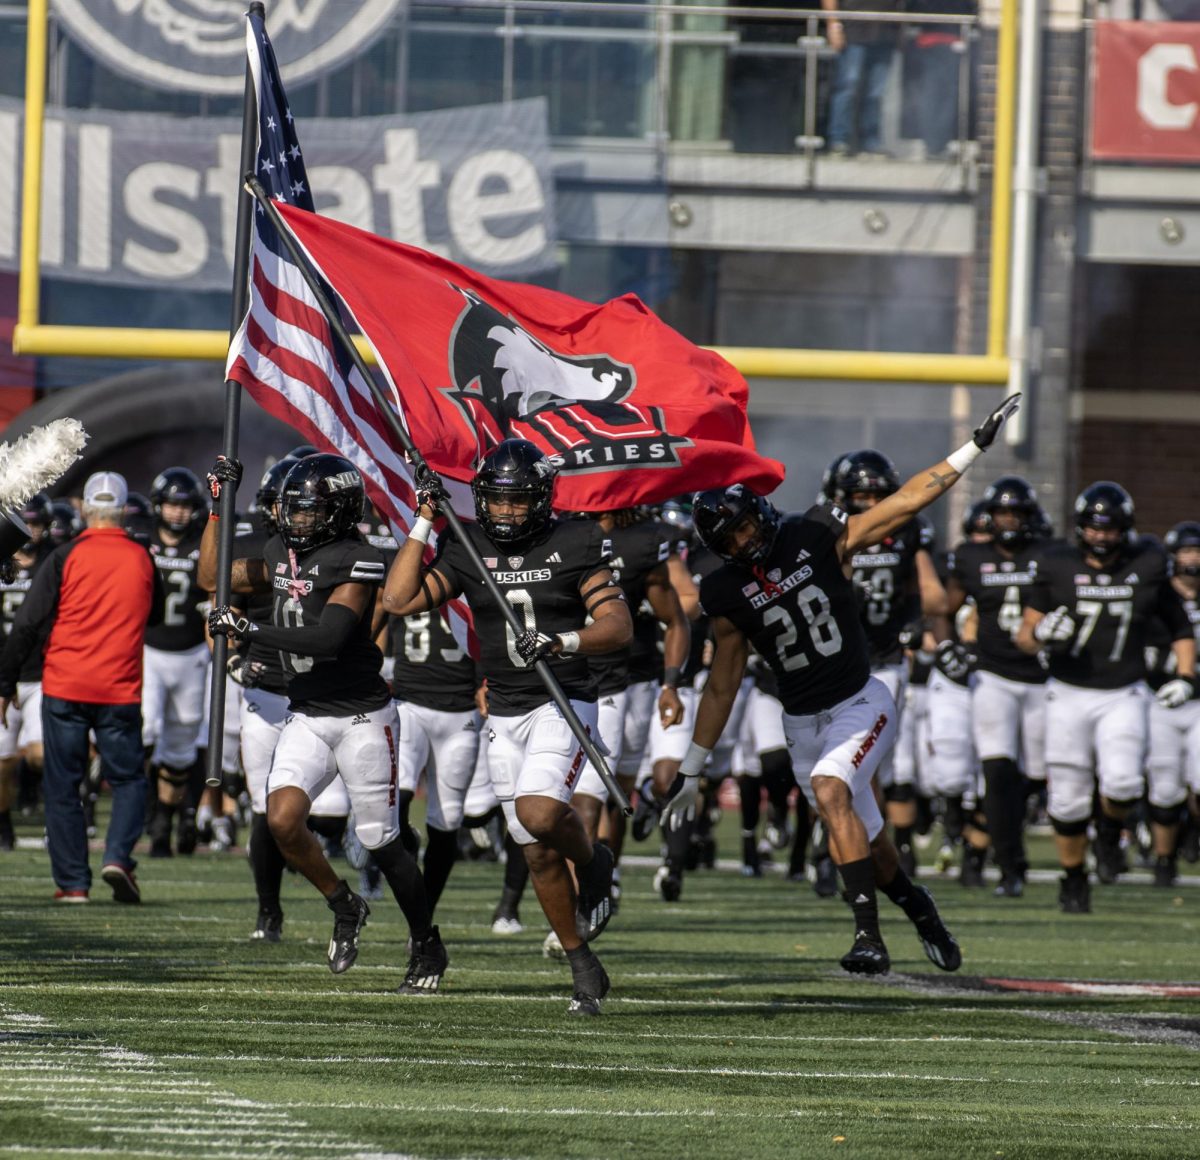 Redshirt+senior+Tyler+Jackson+%280%29+holds+the+NIU+flag+as+he+leads+the+team+onto+the+Huskie+Stadium+field+on+Oct.+21.+The+Huskies+will+take+on+Arkansas+State+in+the+Camellia+Bowl+on+Dec.+23.+%28Tim+Dodge+%7C+Northern+Star%29